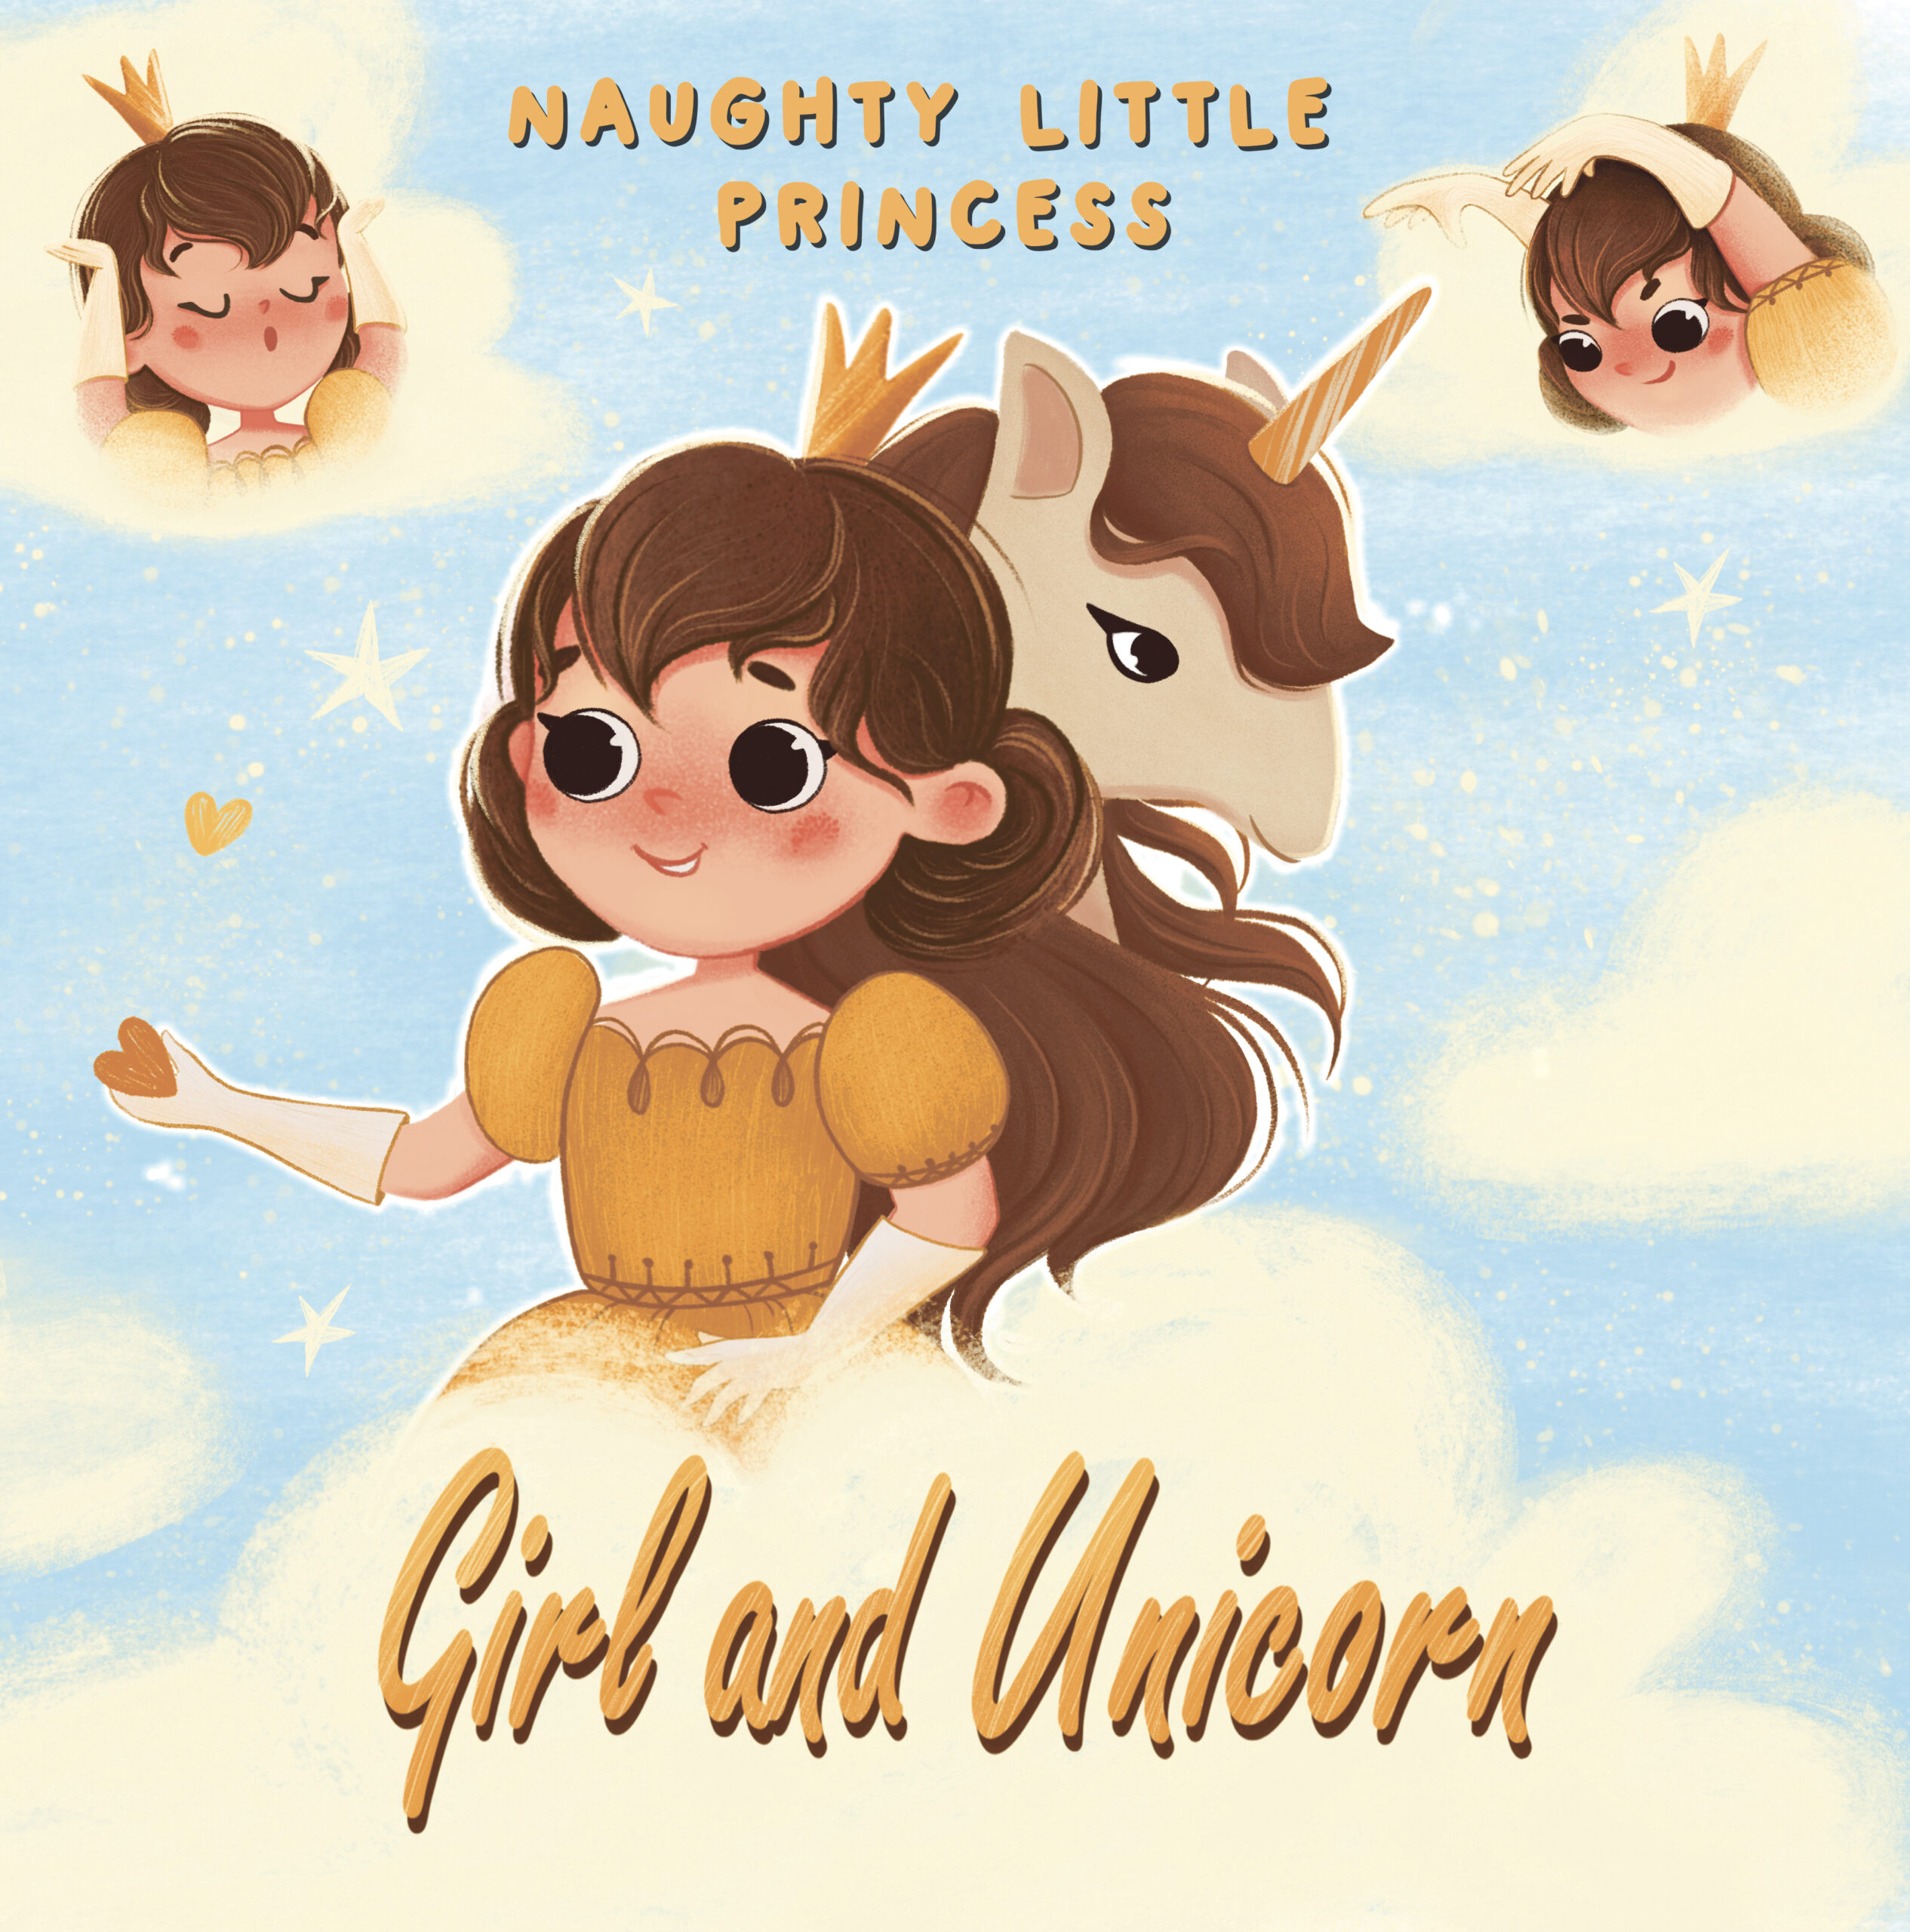 FREE: Girl and Unicorn – Naughty little princess by Alex Fabler